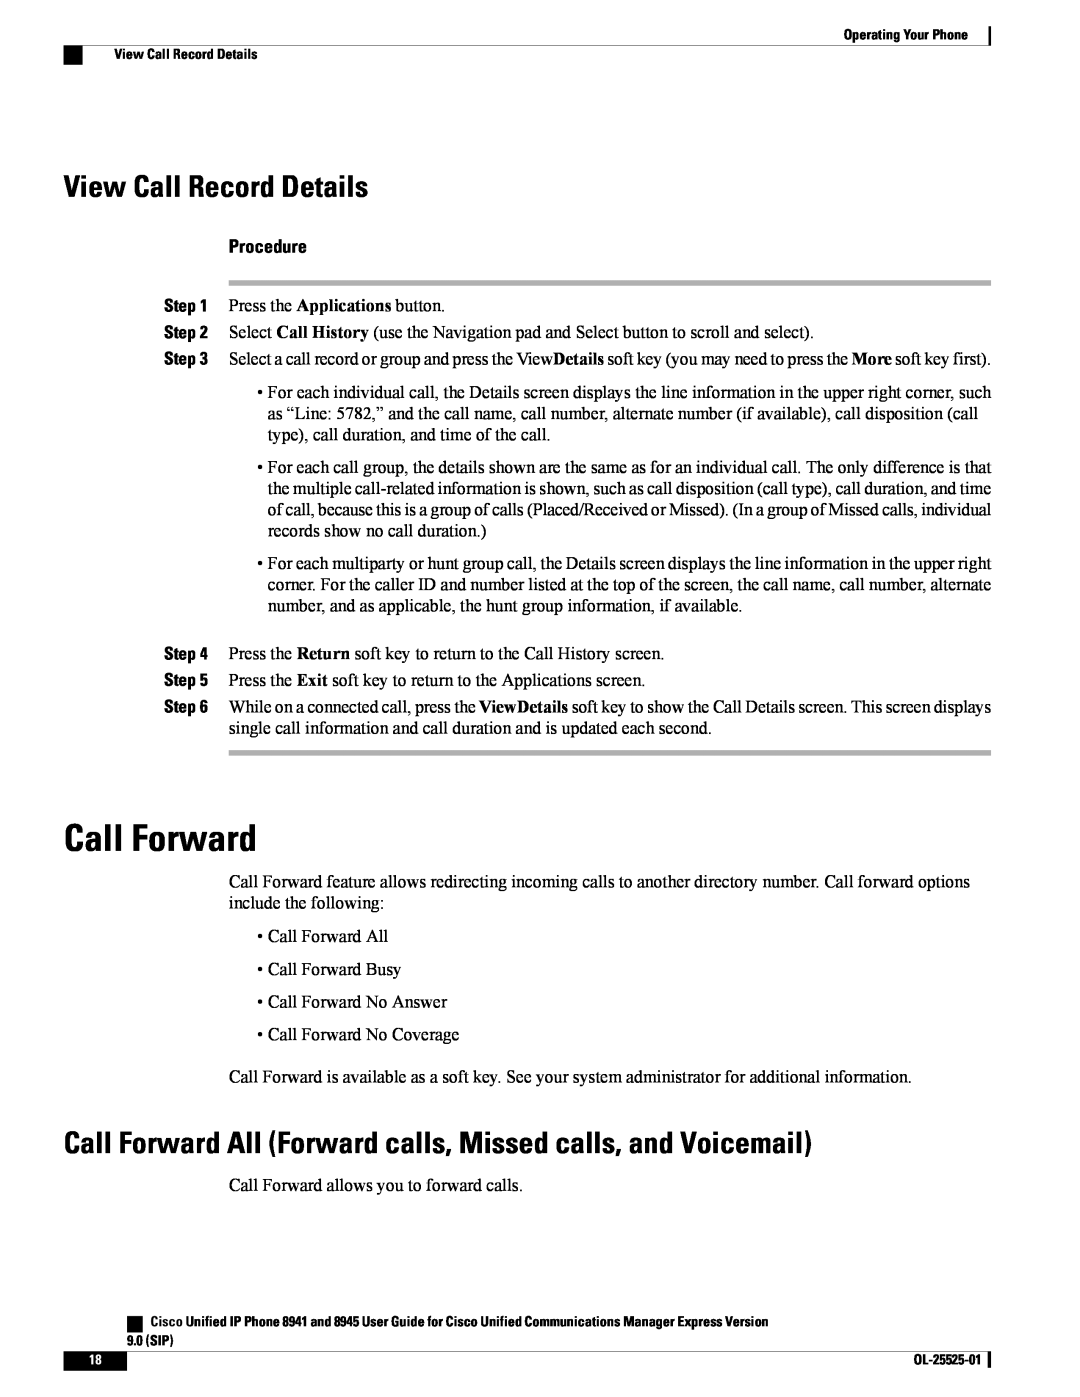 Cisco Systems 8941 View Call Record Details, Call Forward All Forward calls, Missed calls, and Voicemail, Procedure 